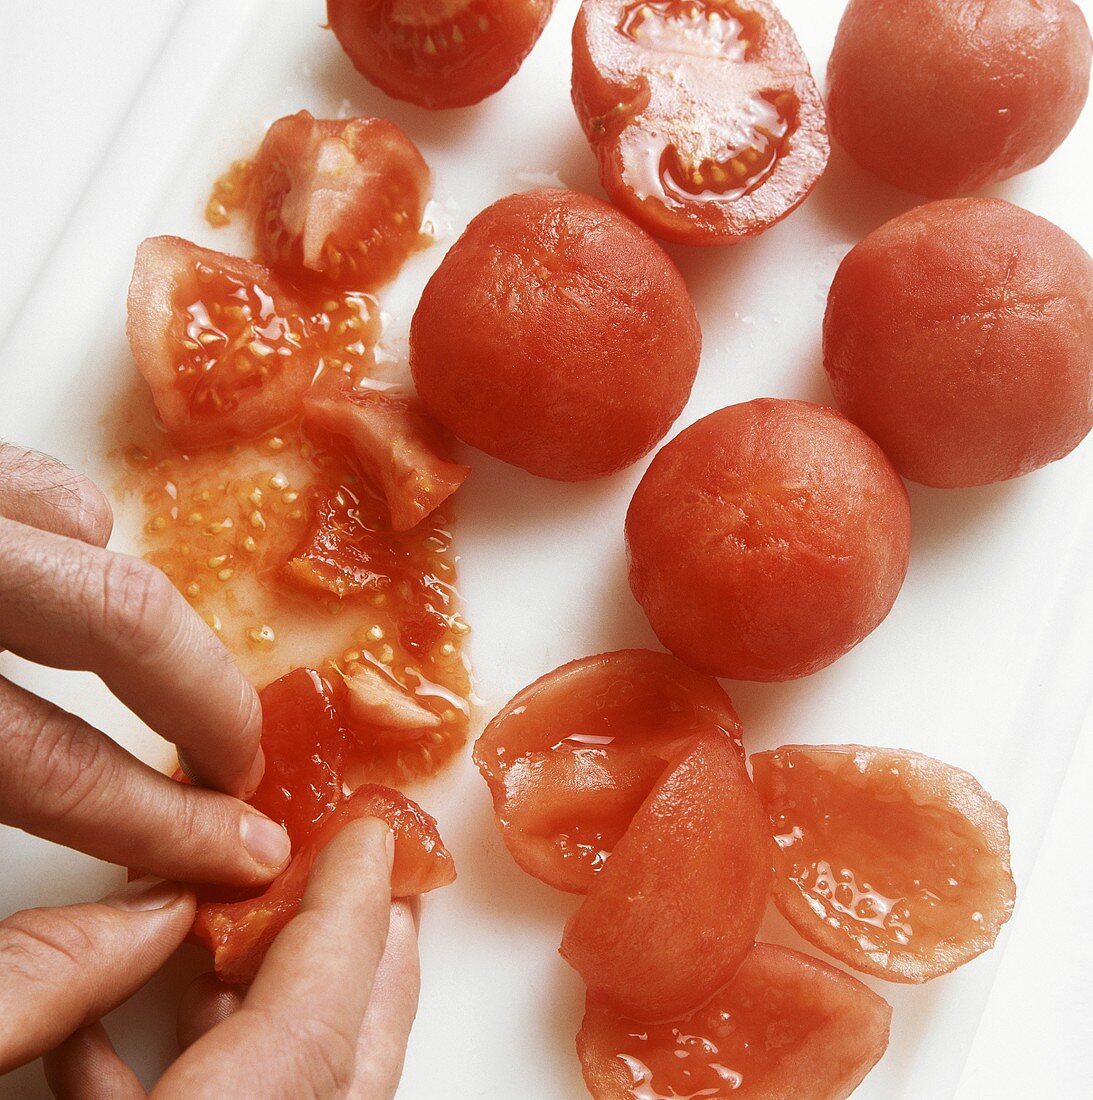 Cutting up cooked tomatoes